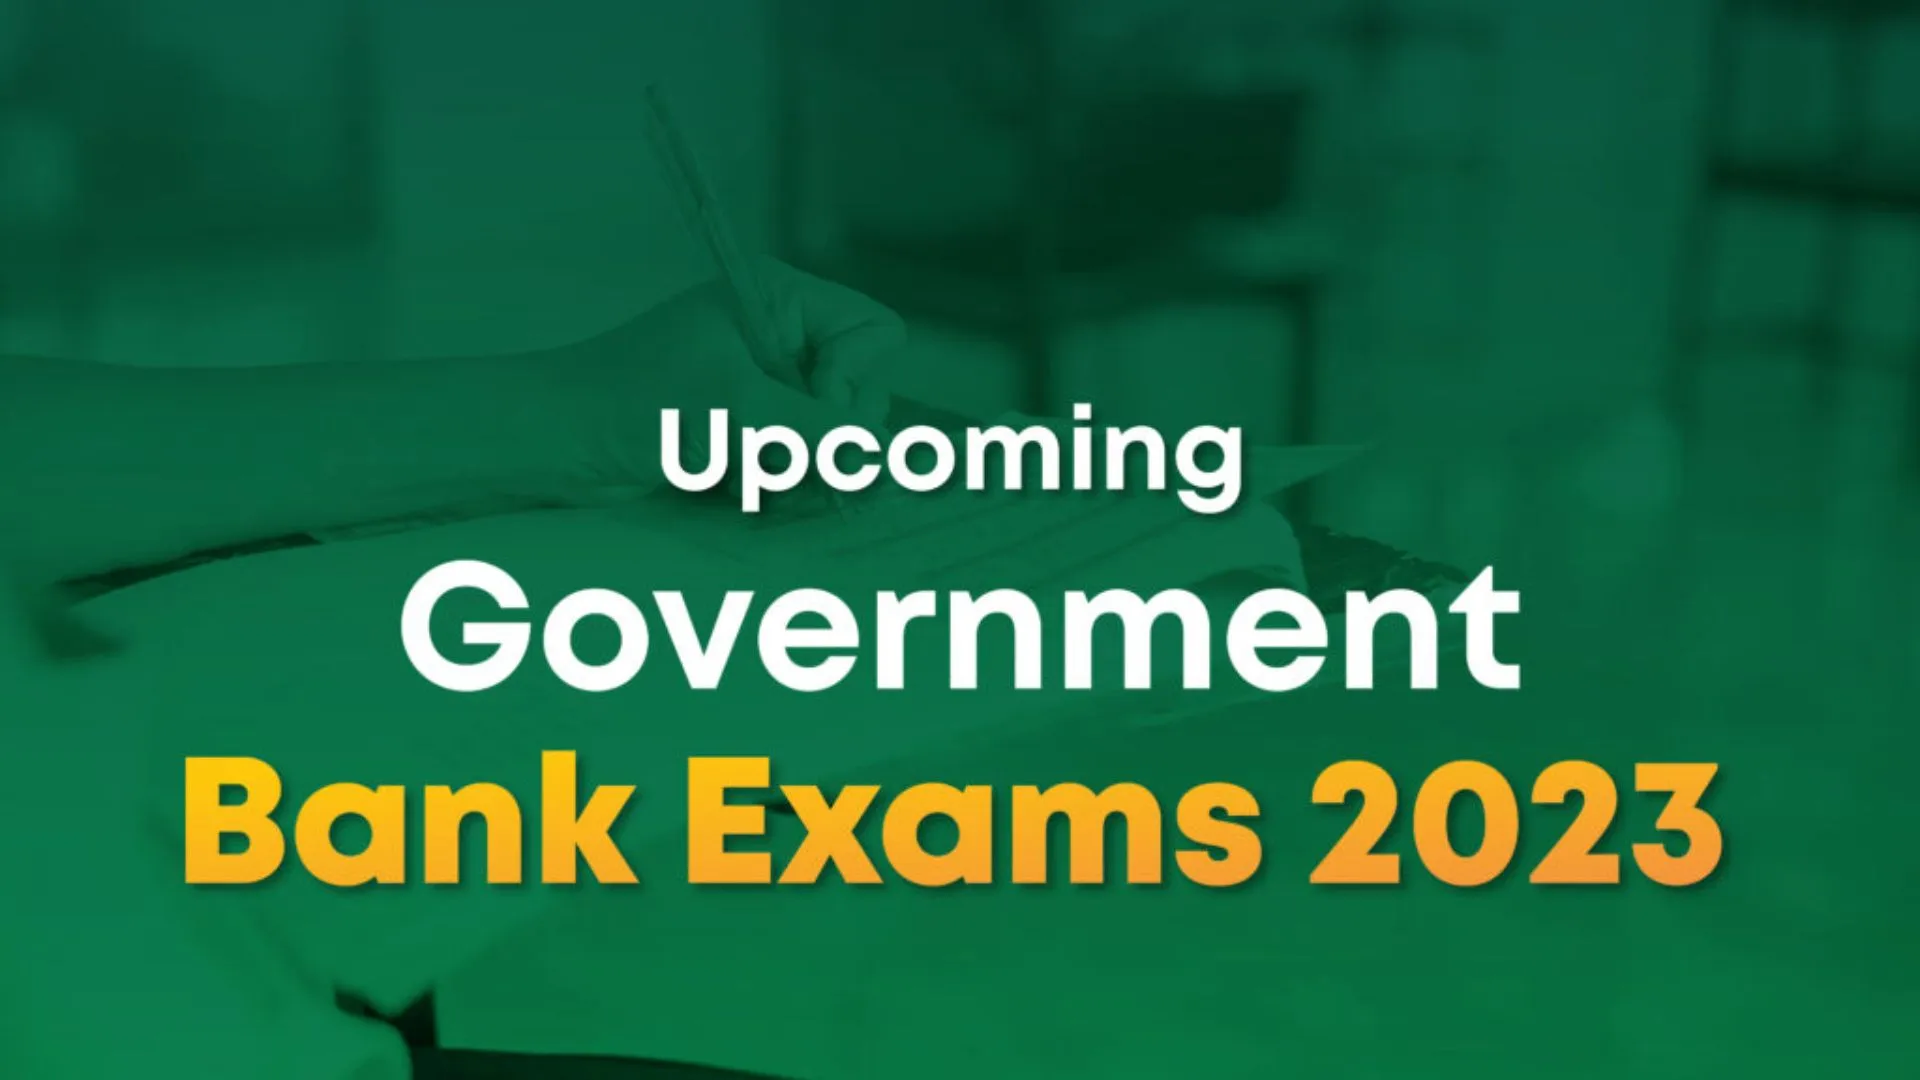 Upcoming Bank Exams 2023, List of Bank Exams to be conducted soon